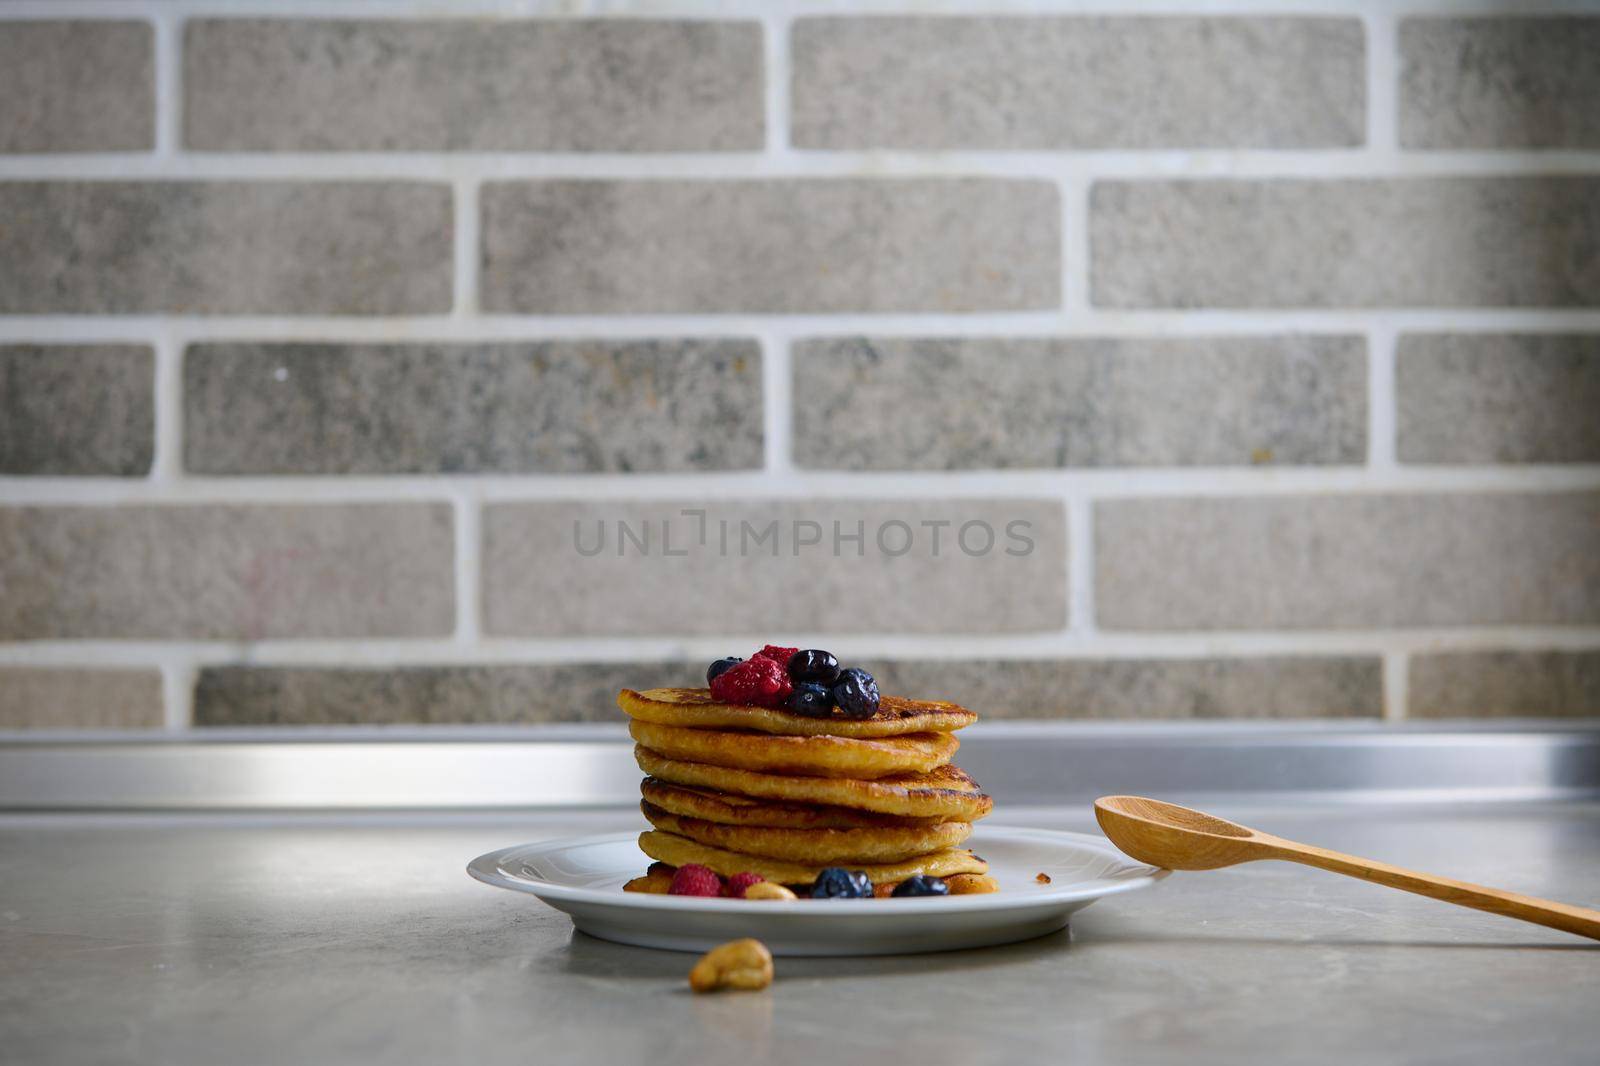 Stack of homemade delicious pancakes garnished with raspberries, blueberries and cashews on a white plate against a gray brick kitchen wall. Shrove Tuesday, Shrovetide concept. Food background by artgf